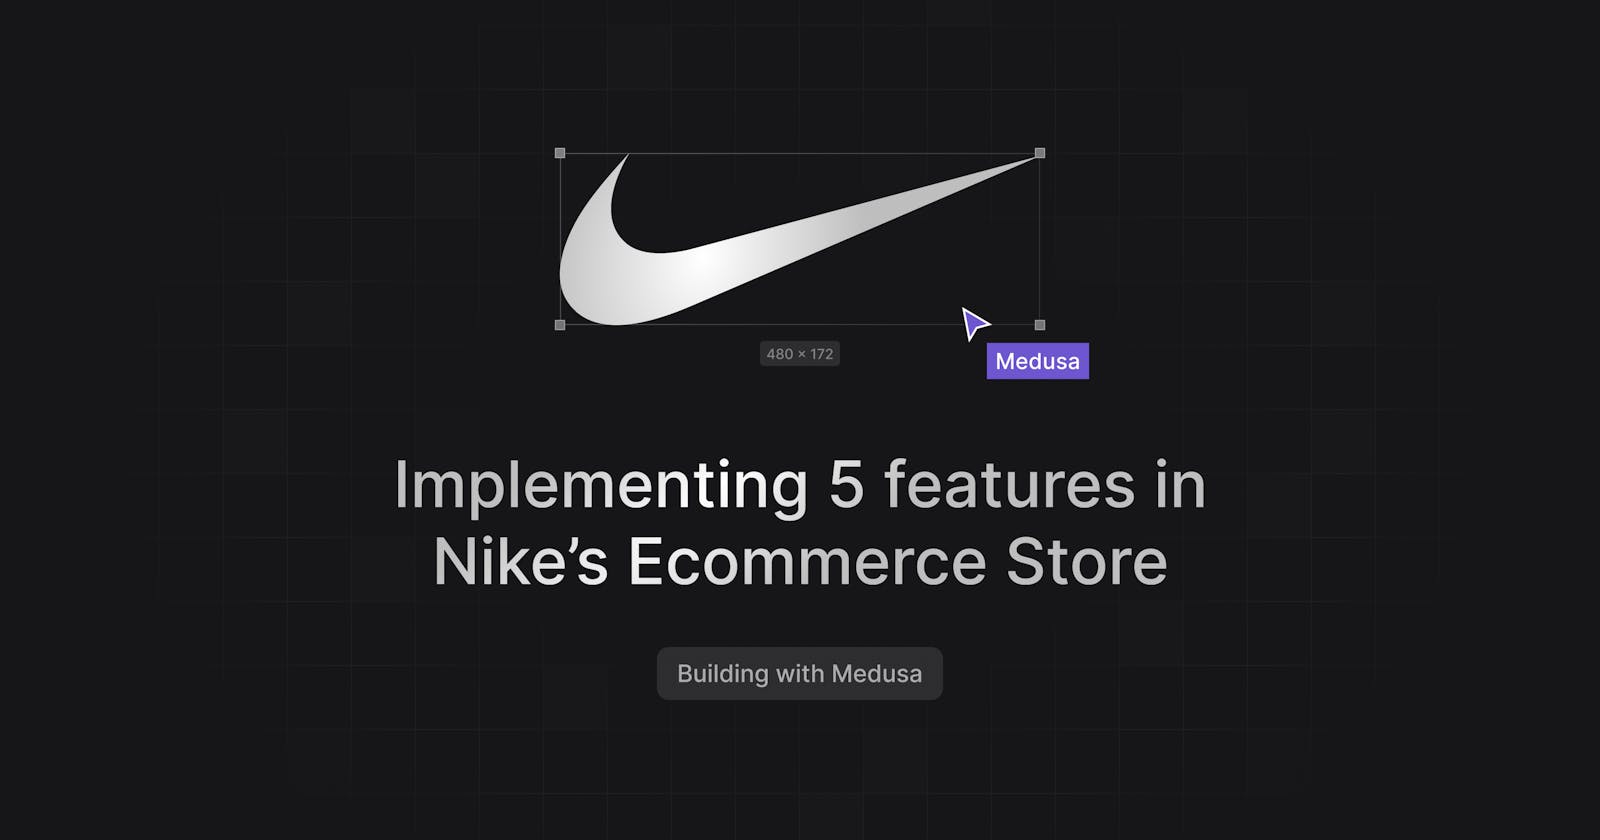 Building Nike’s Ecommerce Features with Medusa